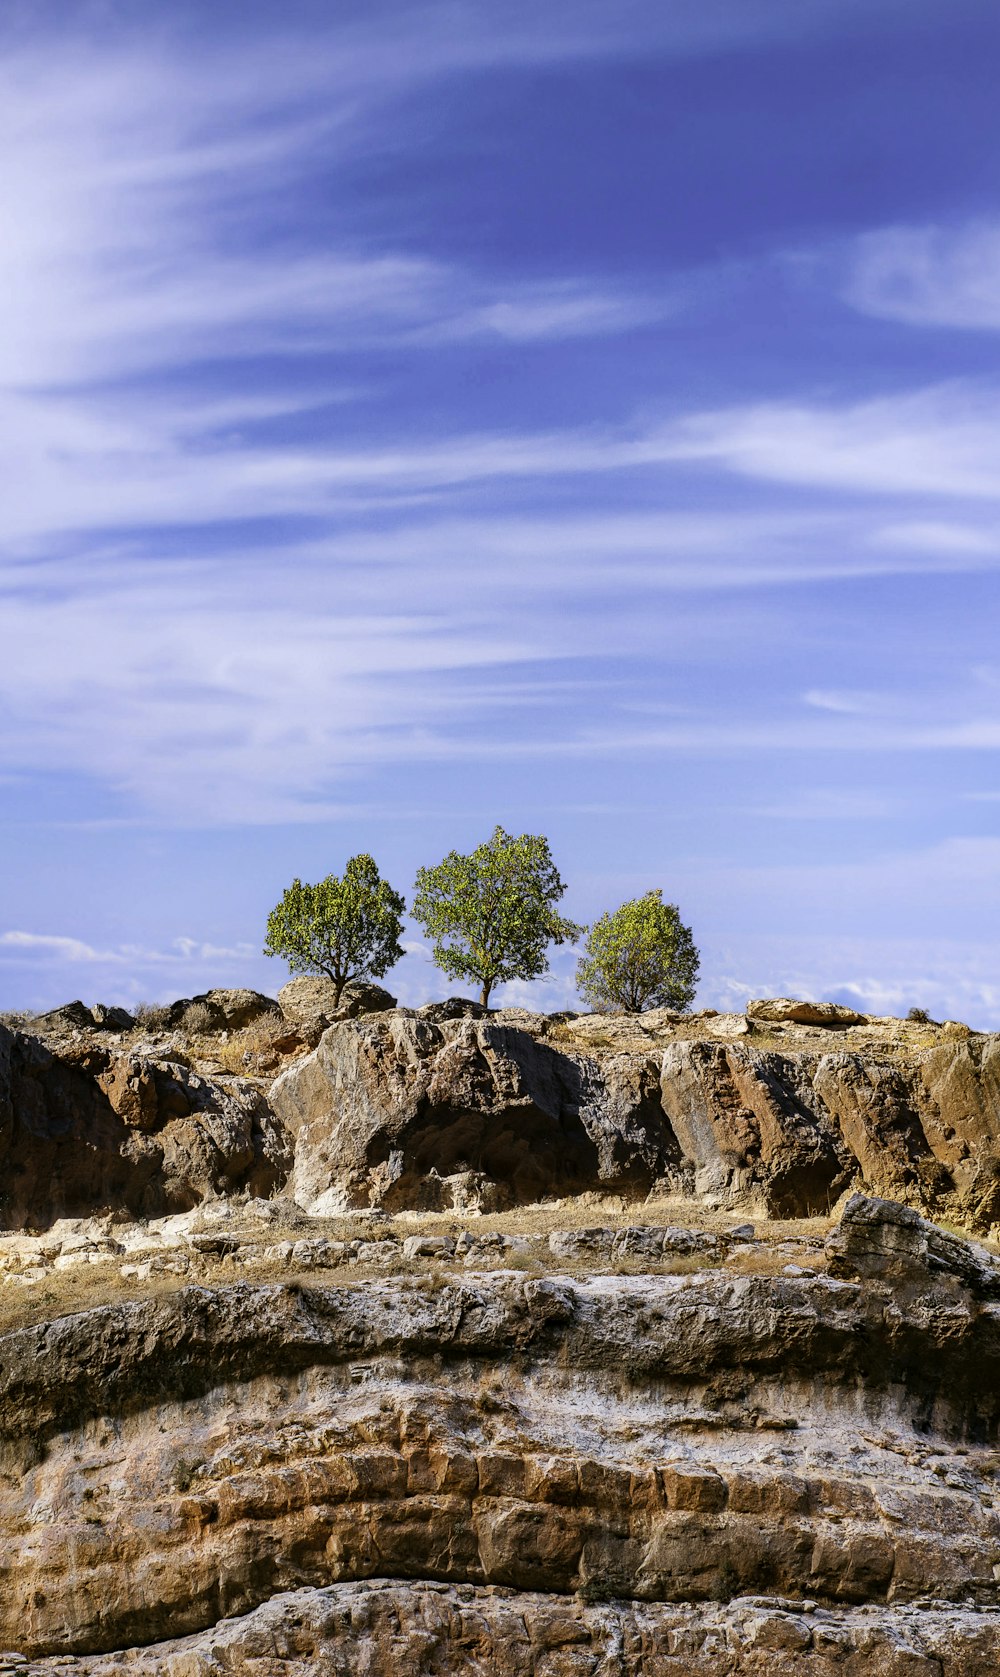 a group of trees on a rocky cliff